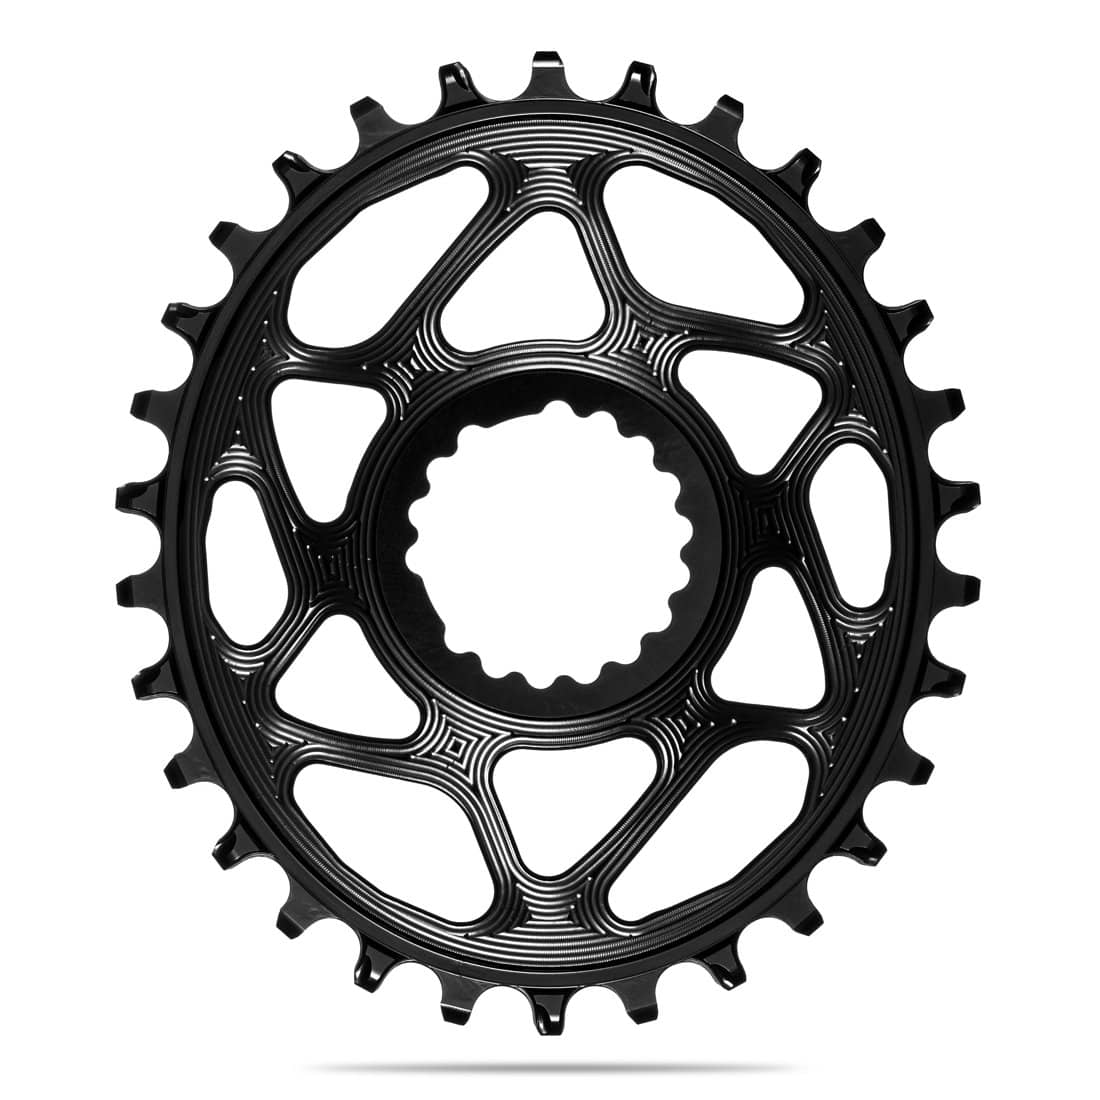 absoluteblack narrow wide direct mount oval chainring for Cannondale sisl